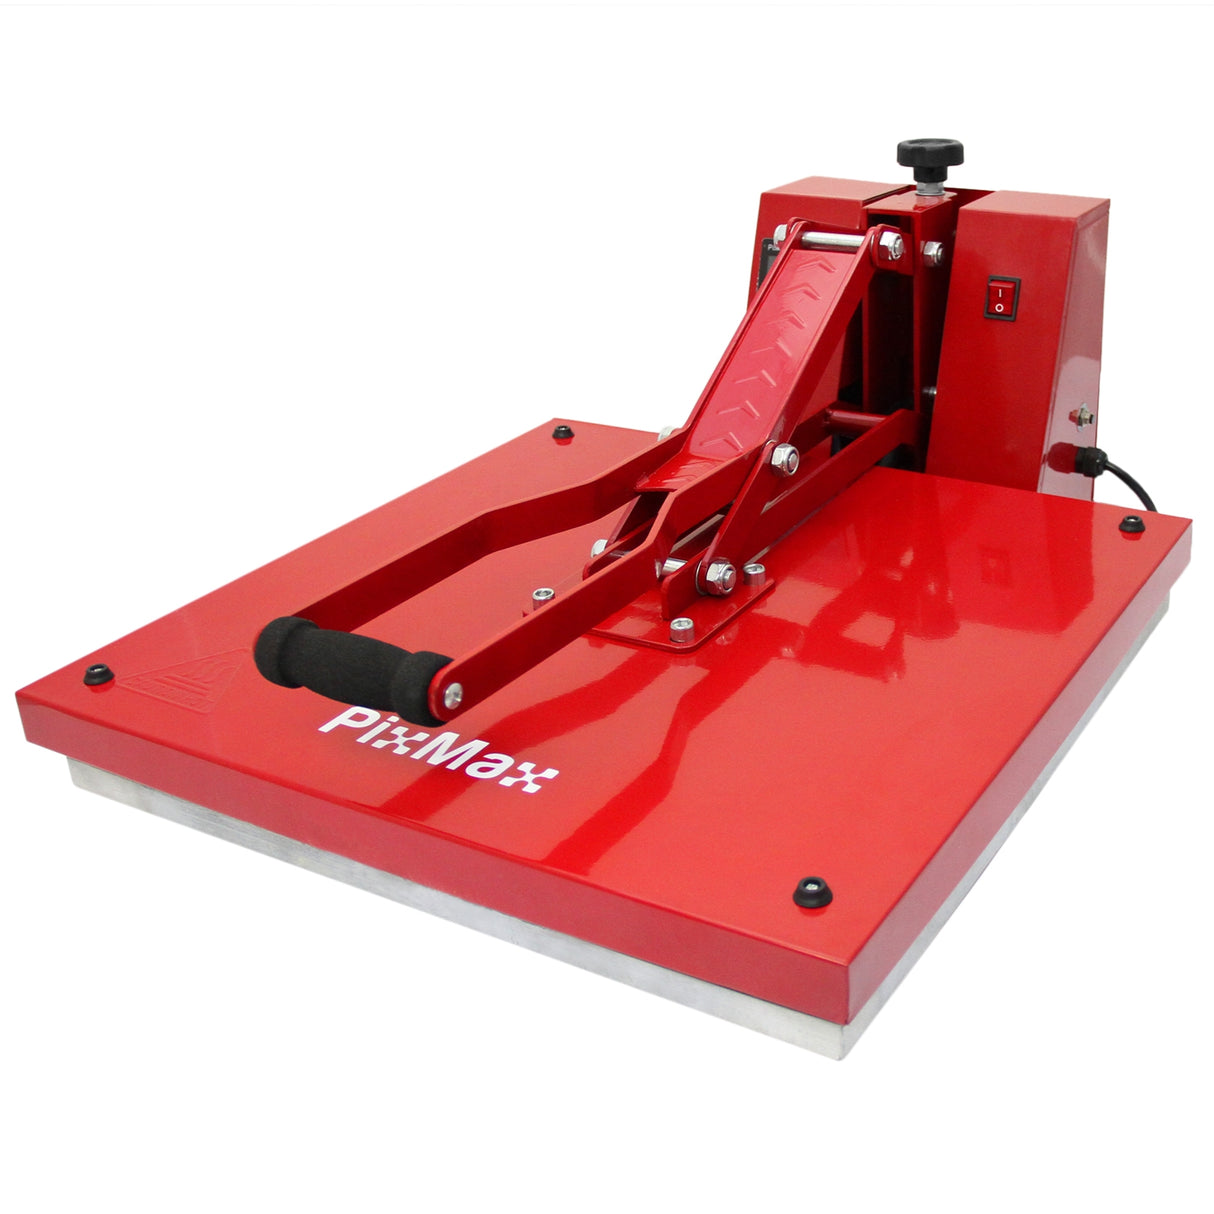 LED Vinyl Cutter With 50cm Clam Heat Press & Software